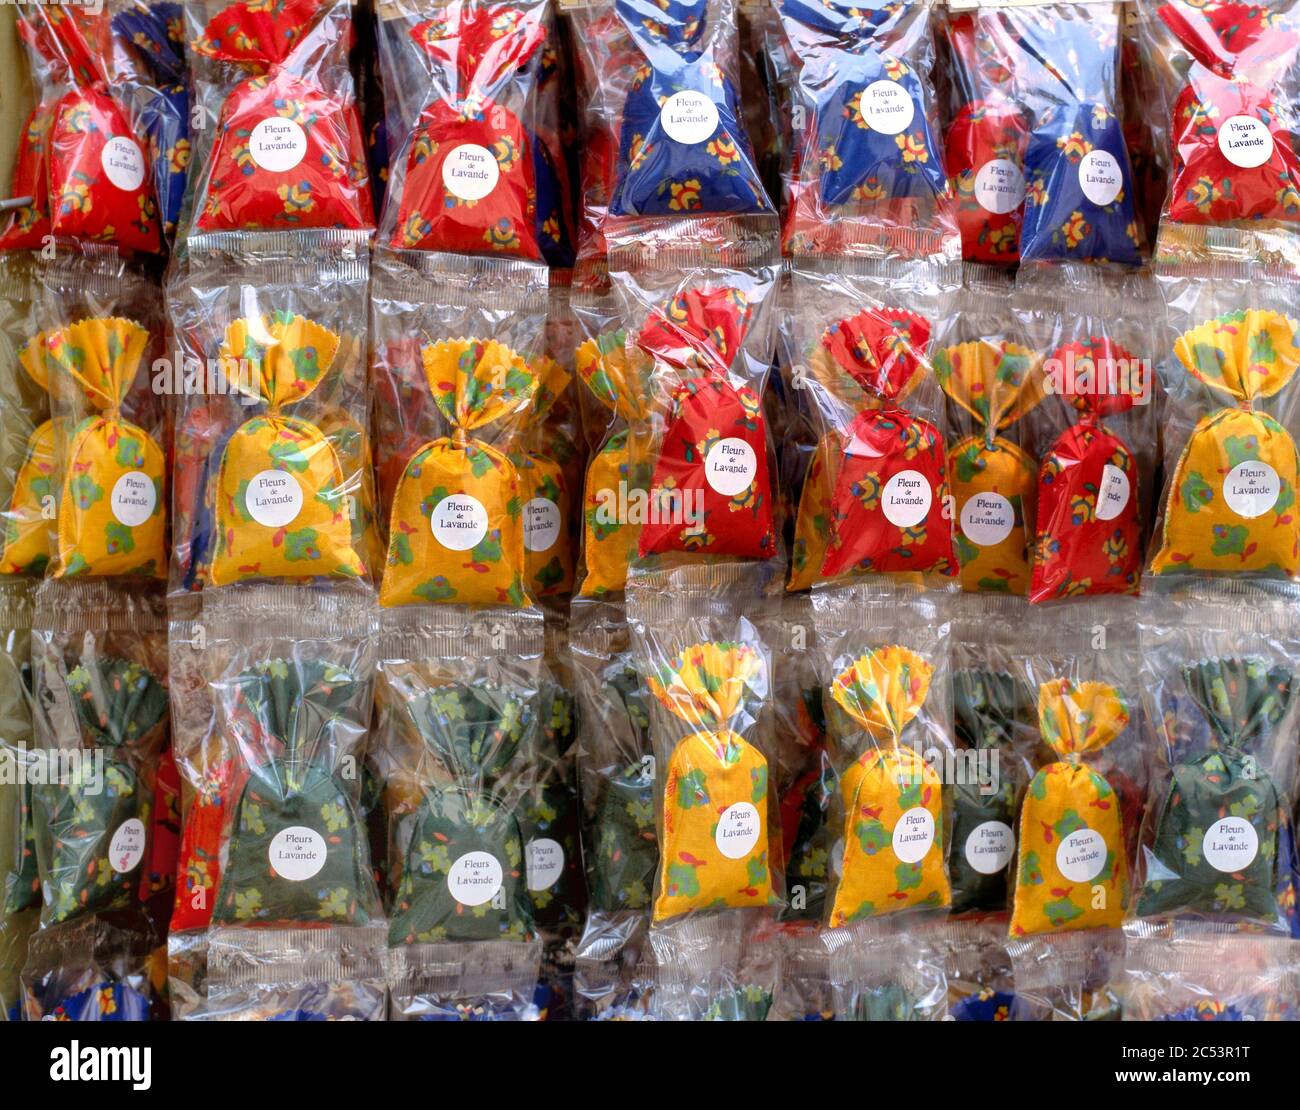 Lavendel bags at market stall in Roussilion, Provence, France Stock Photo